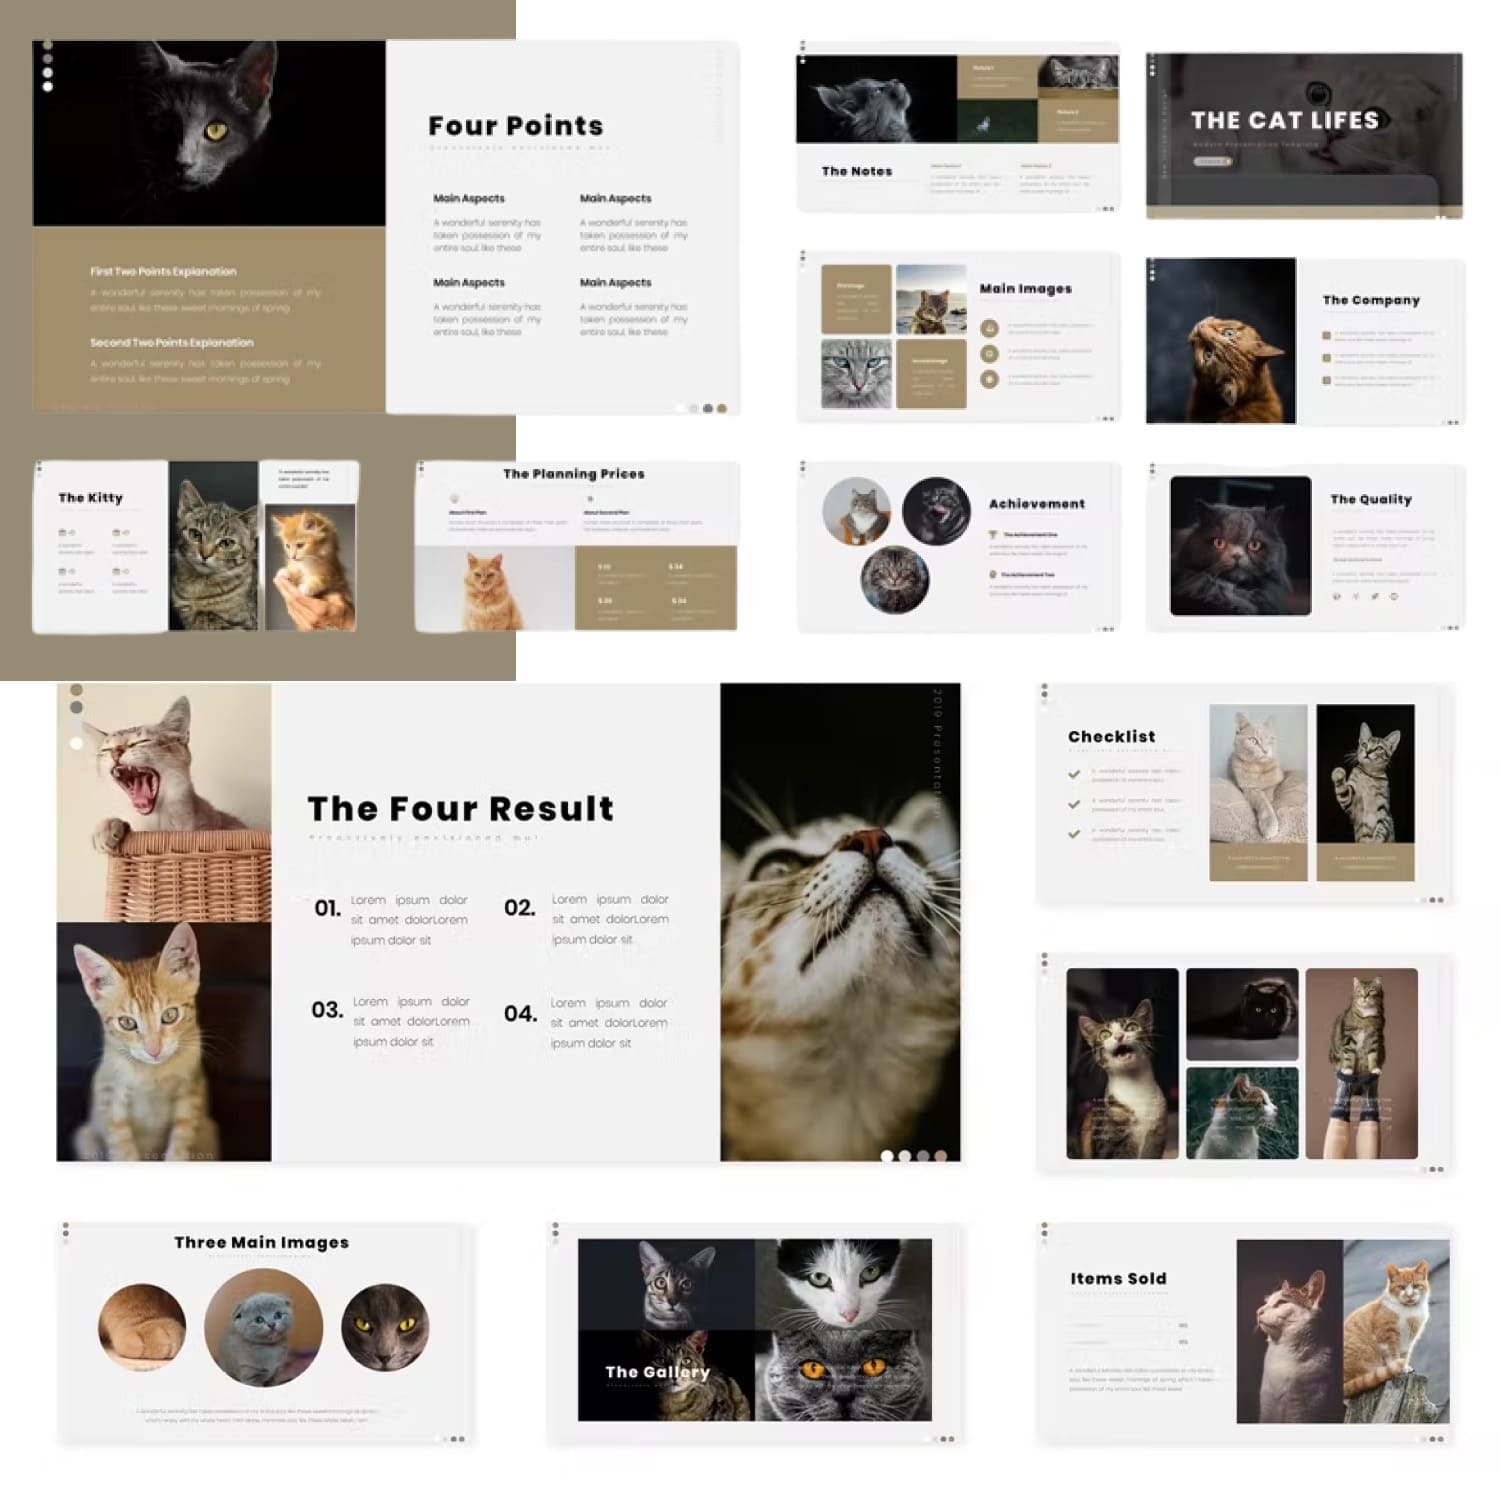 The cat lifes powerpoint template from karkunstudio.